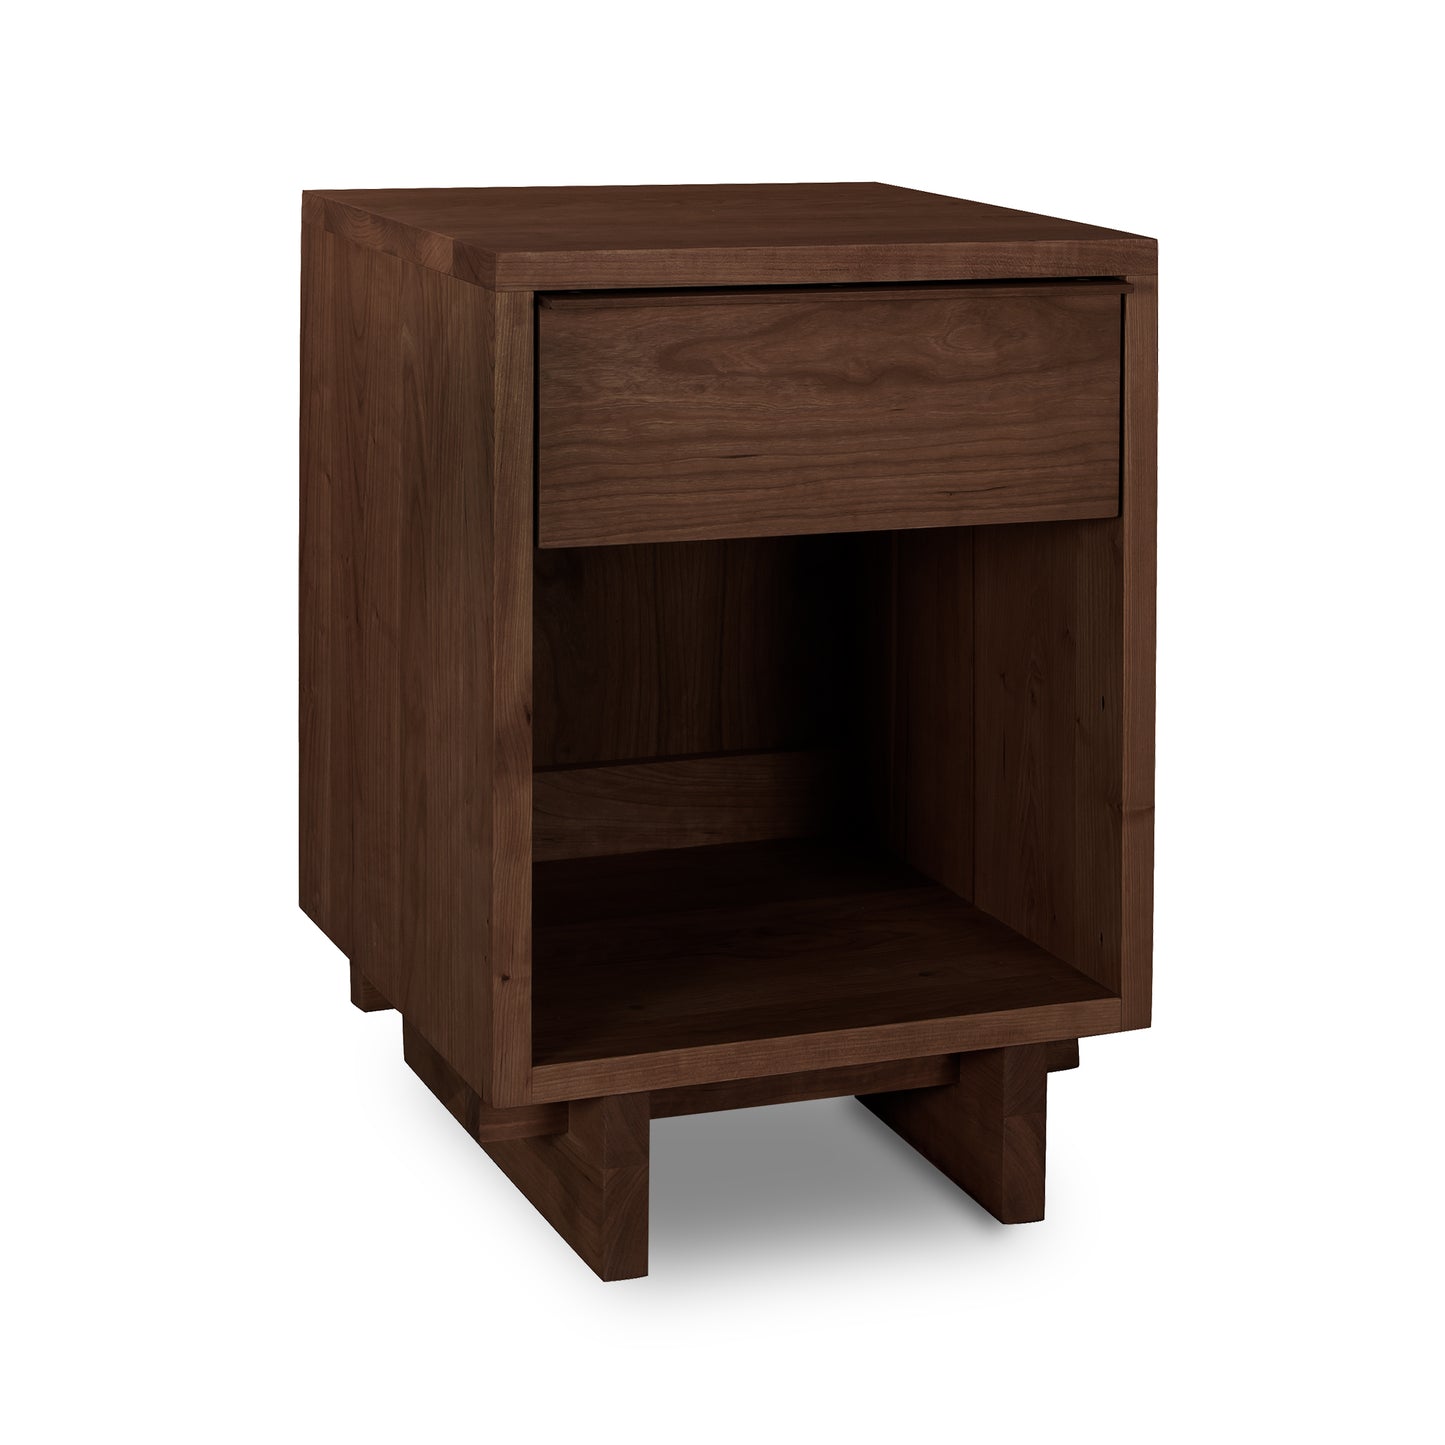 A Vermont Furniture Designs Kipling 1-Drawer Enclosed Shelf Nightstand, isolated on a white background.